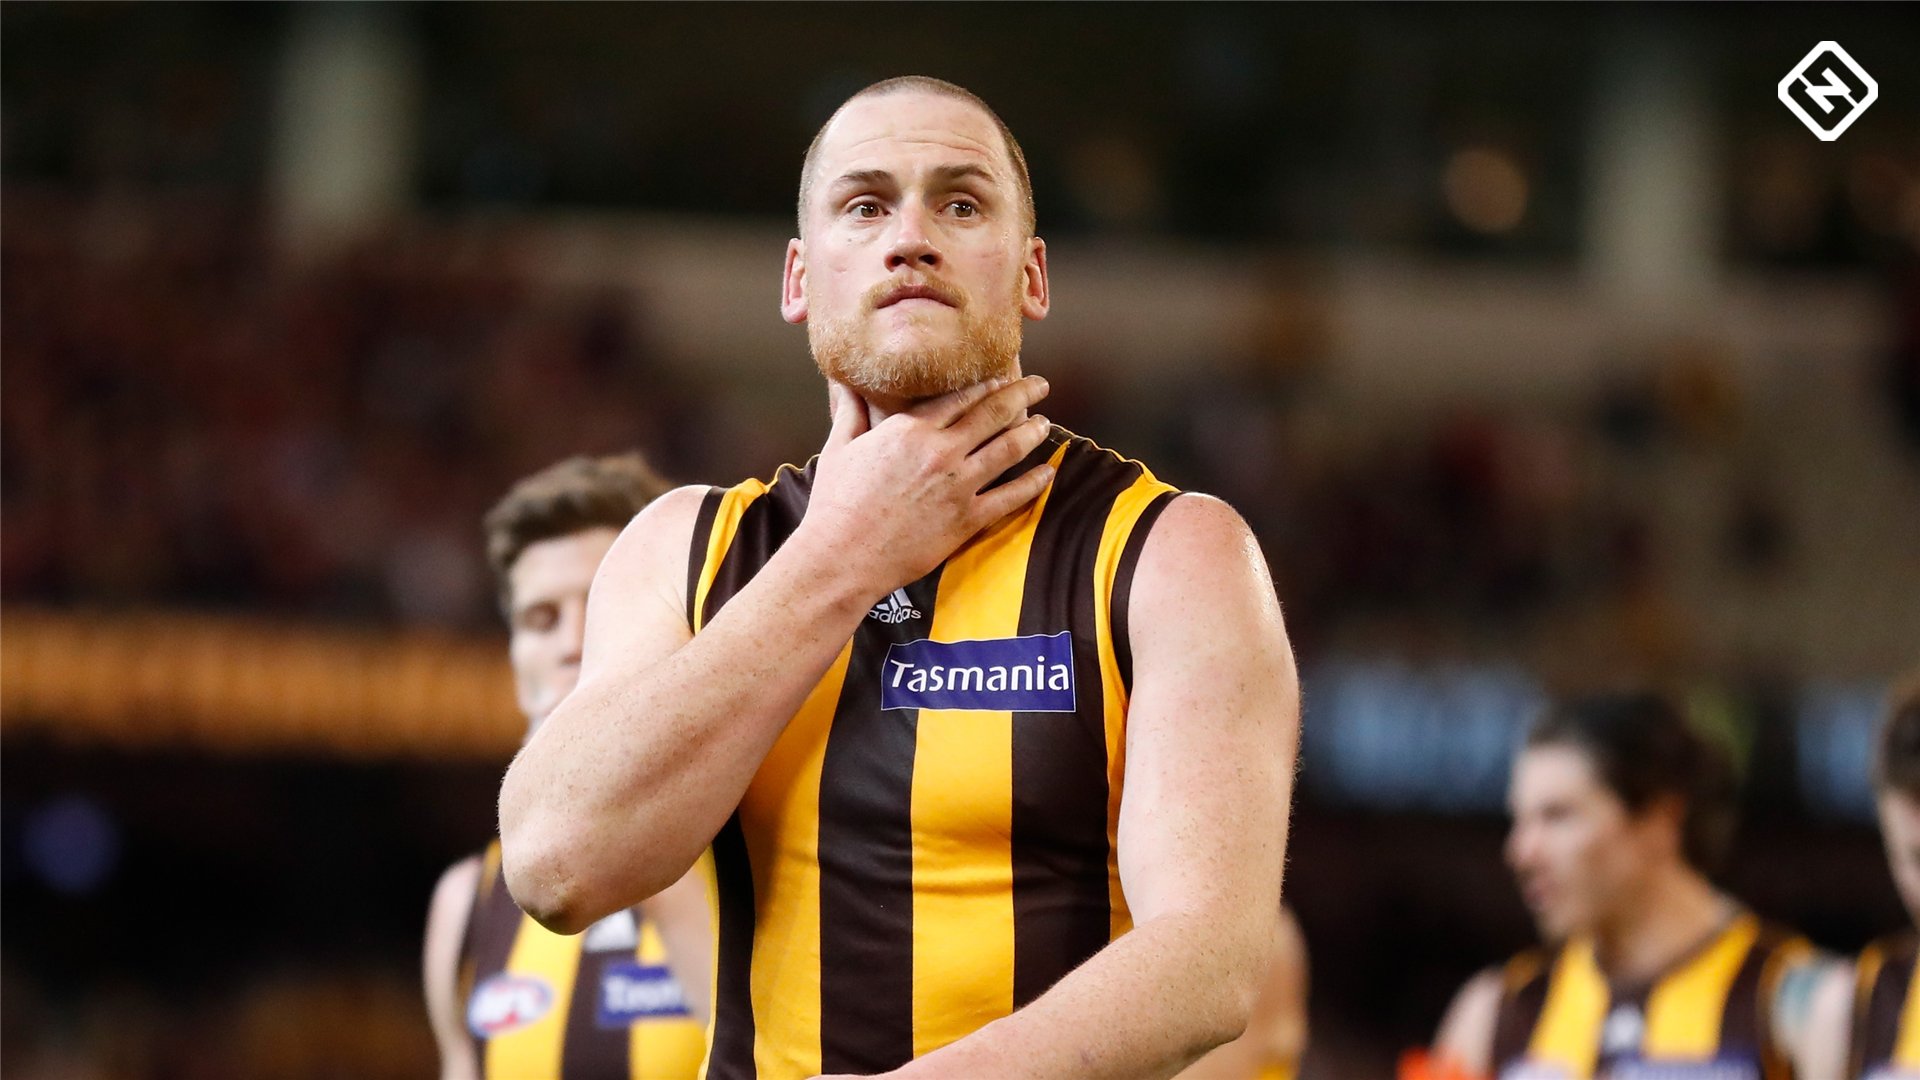 Hawthorn Hawks: 2019 fixtures, preview, list changes, every player and odds